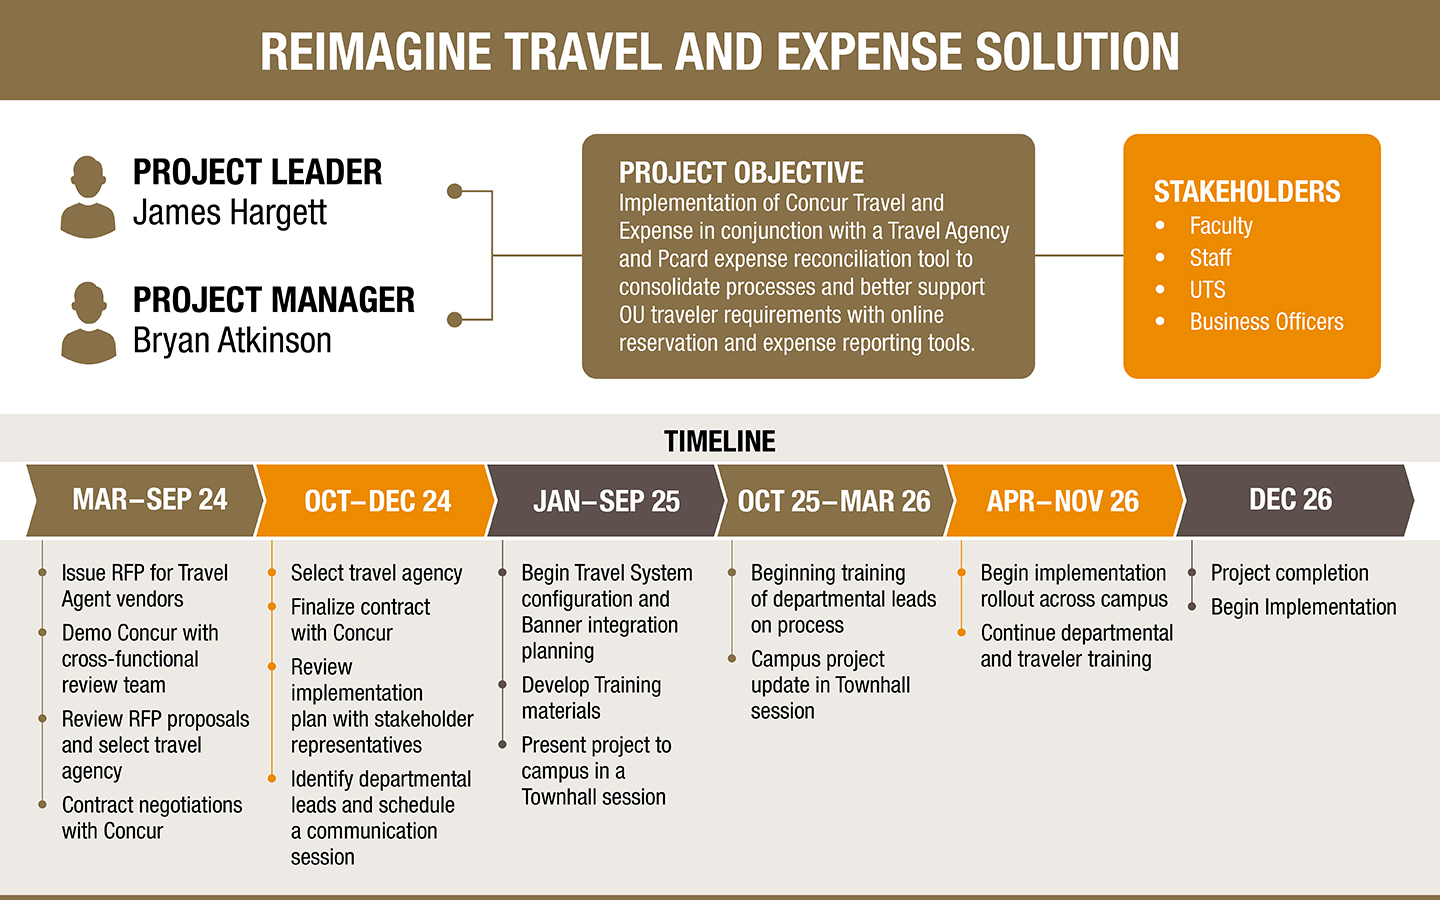 Reimagine Travel and Expense Solution infographic. Text description follows the graphic.